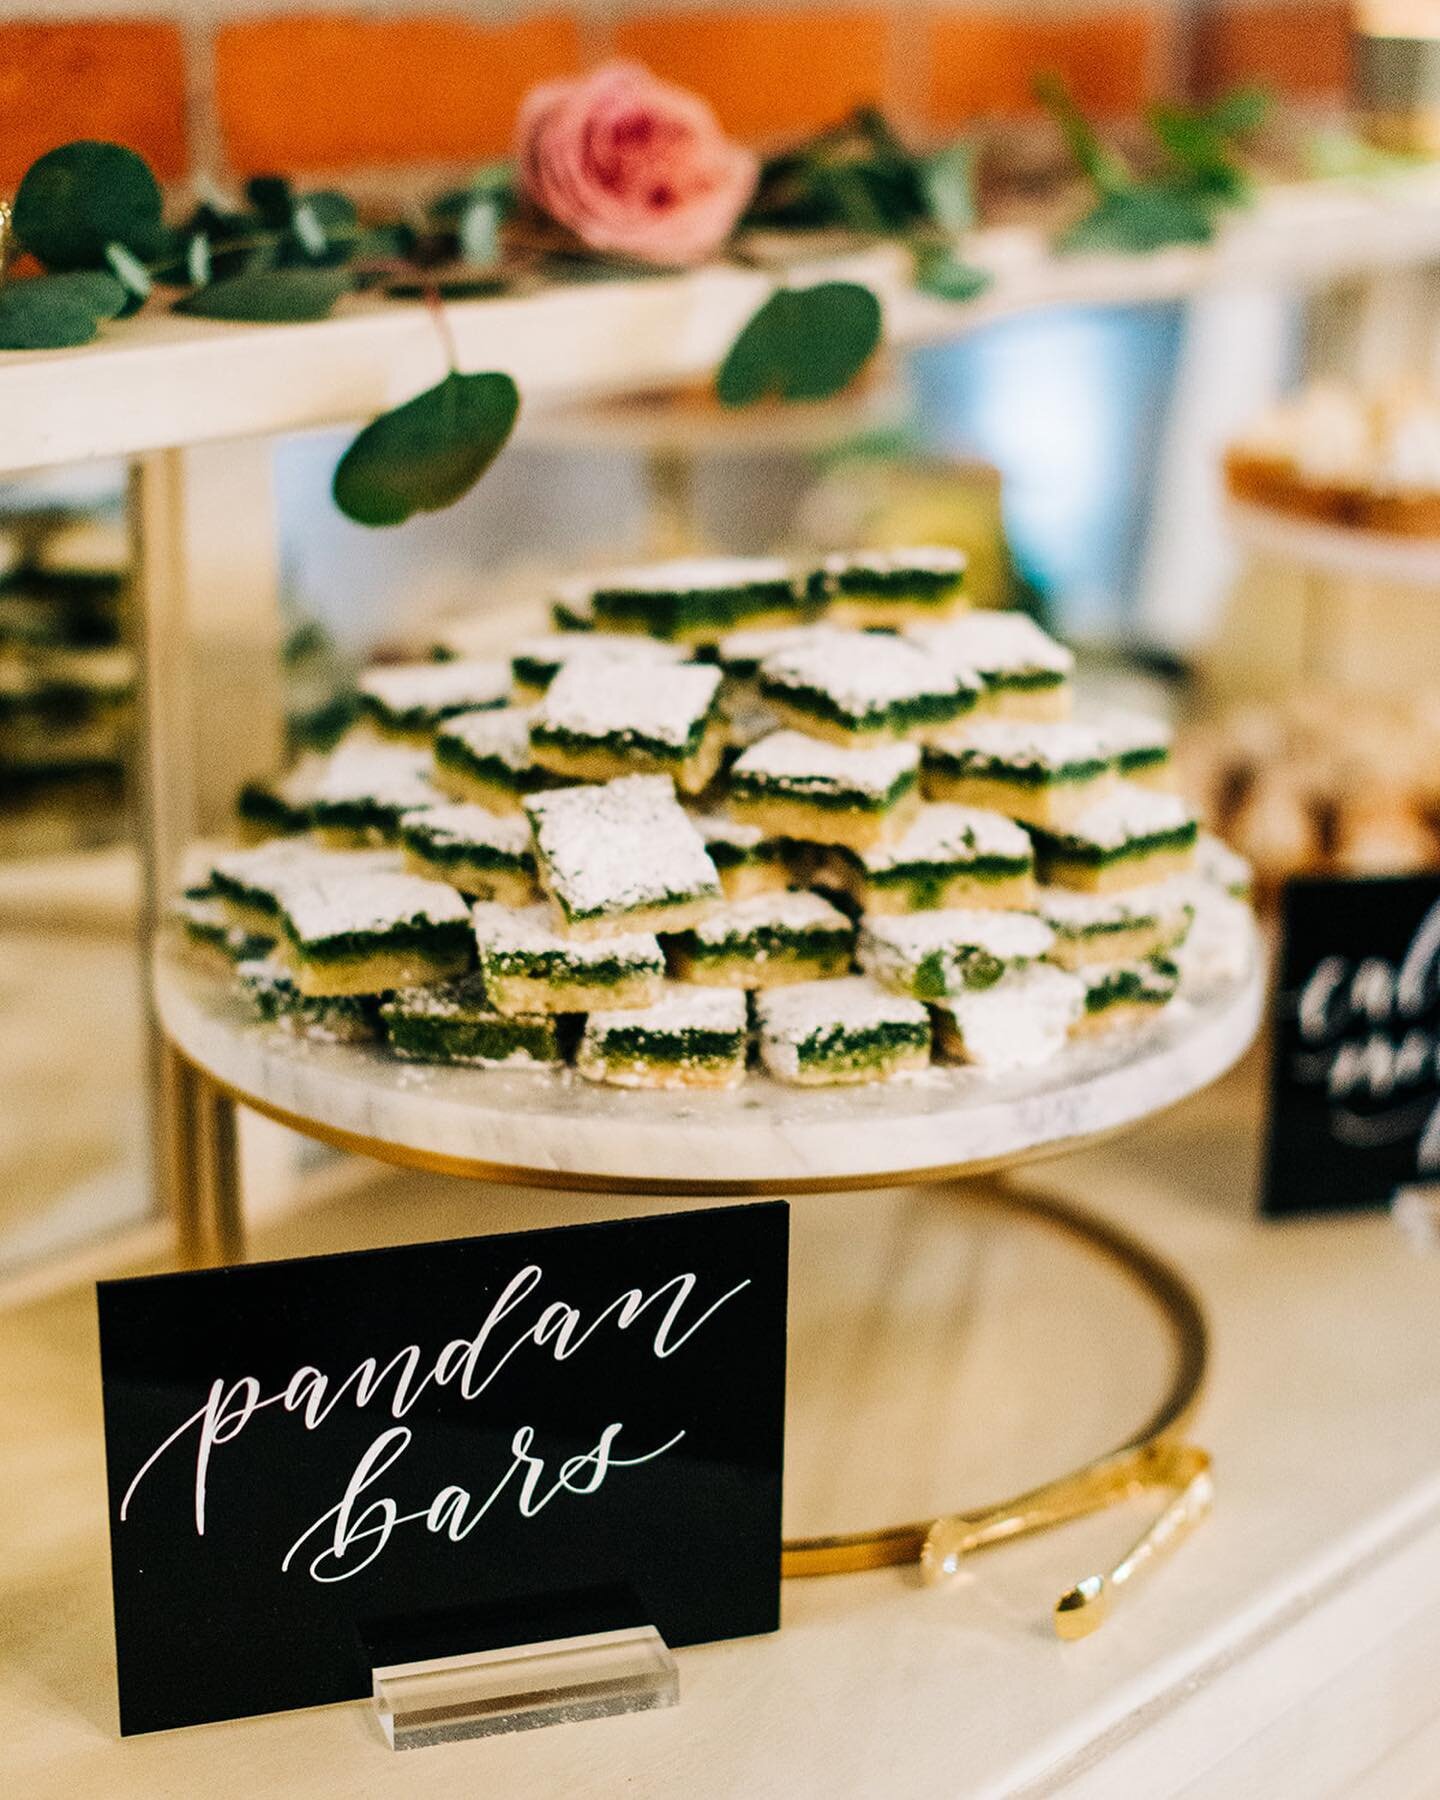 Pandan Bars anyone? And yes, you can definitely serve this treat for weddings or other special events. 

Pandan-Coconut custard, Shortbread Crust dusted with powdered sugar&hellip;so delicate and delicious. Definitely a crowd and couples&rsquo; fave.